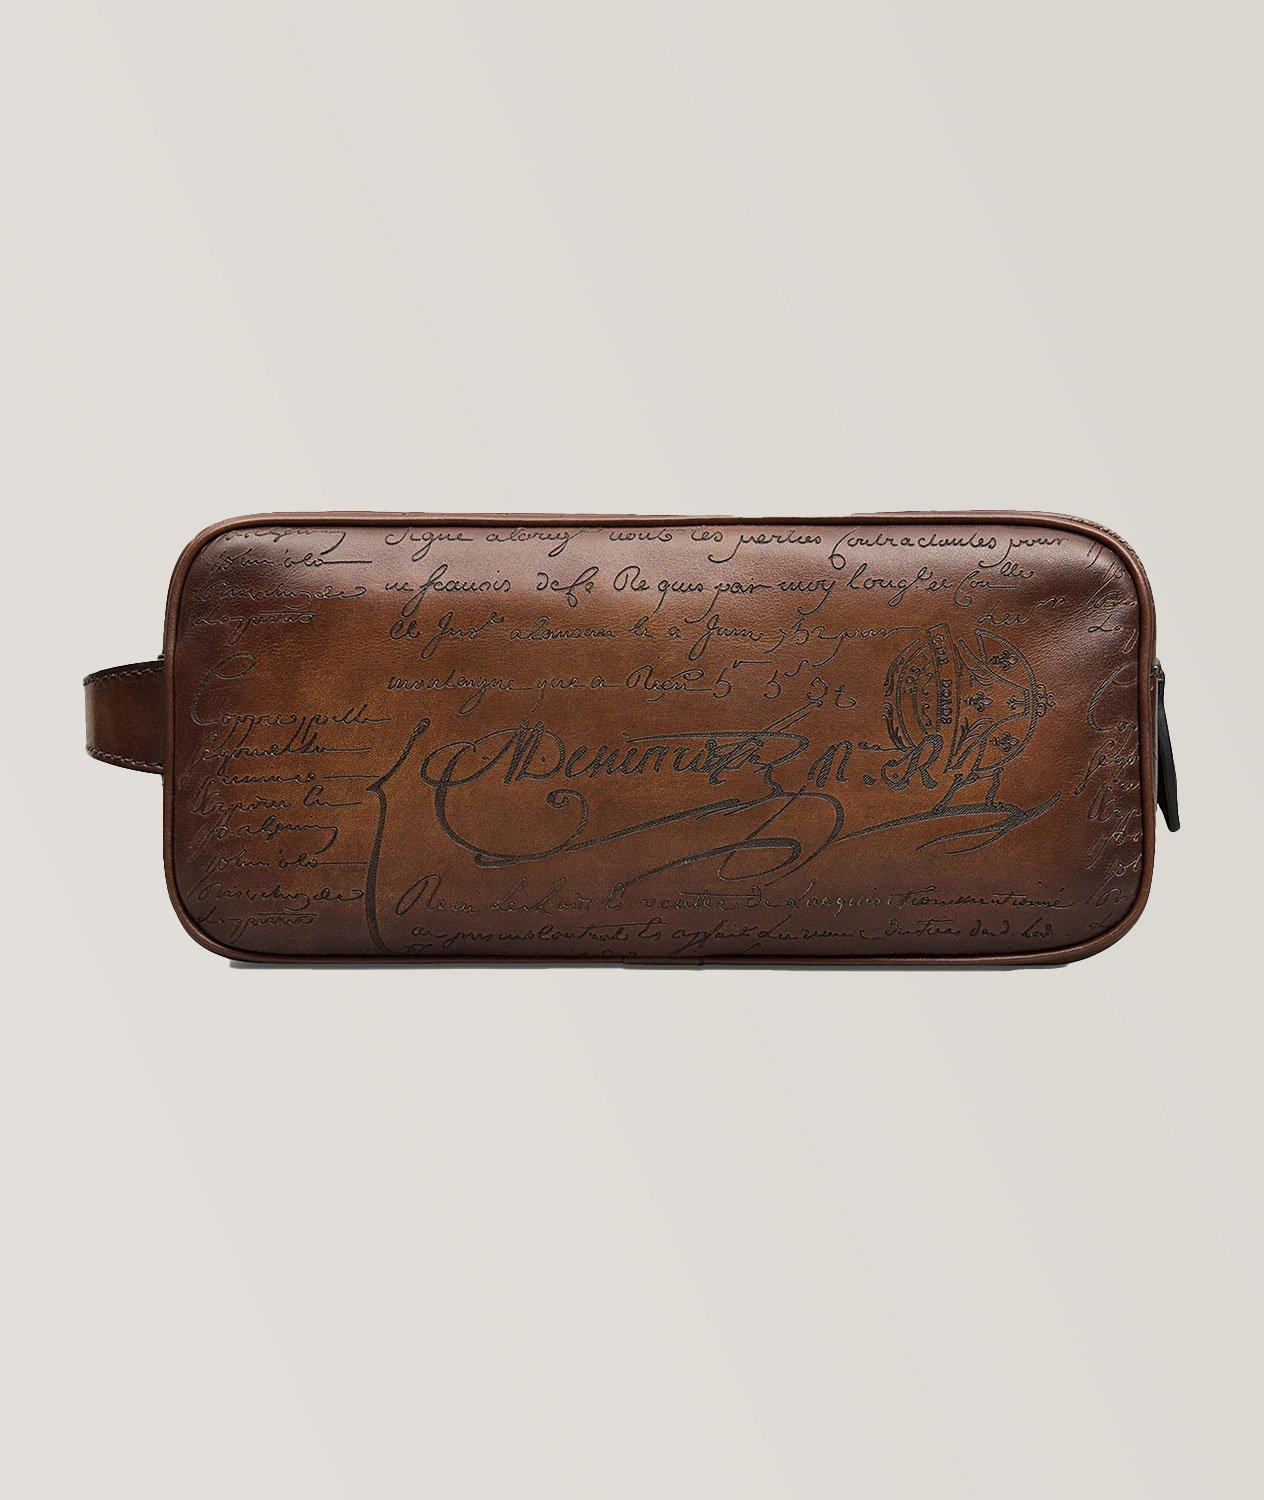 Formula Scritto Leather Toiletry Bag image 0